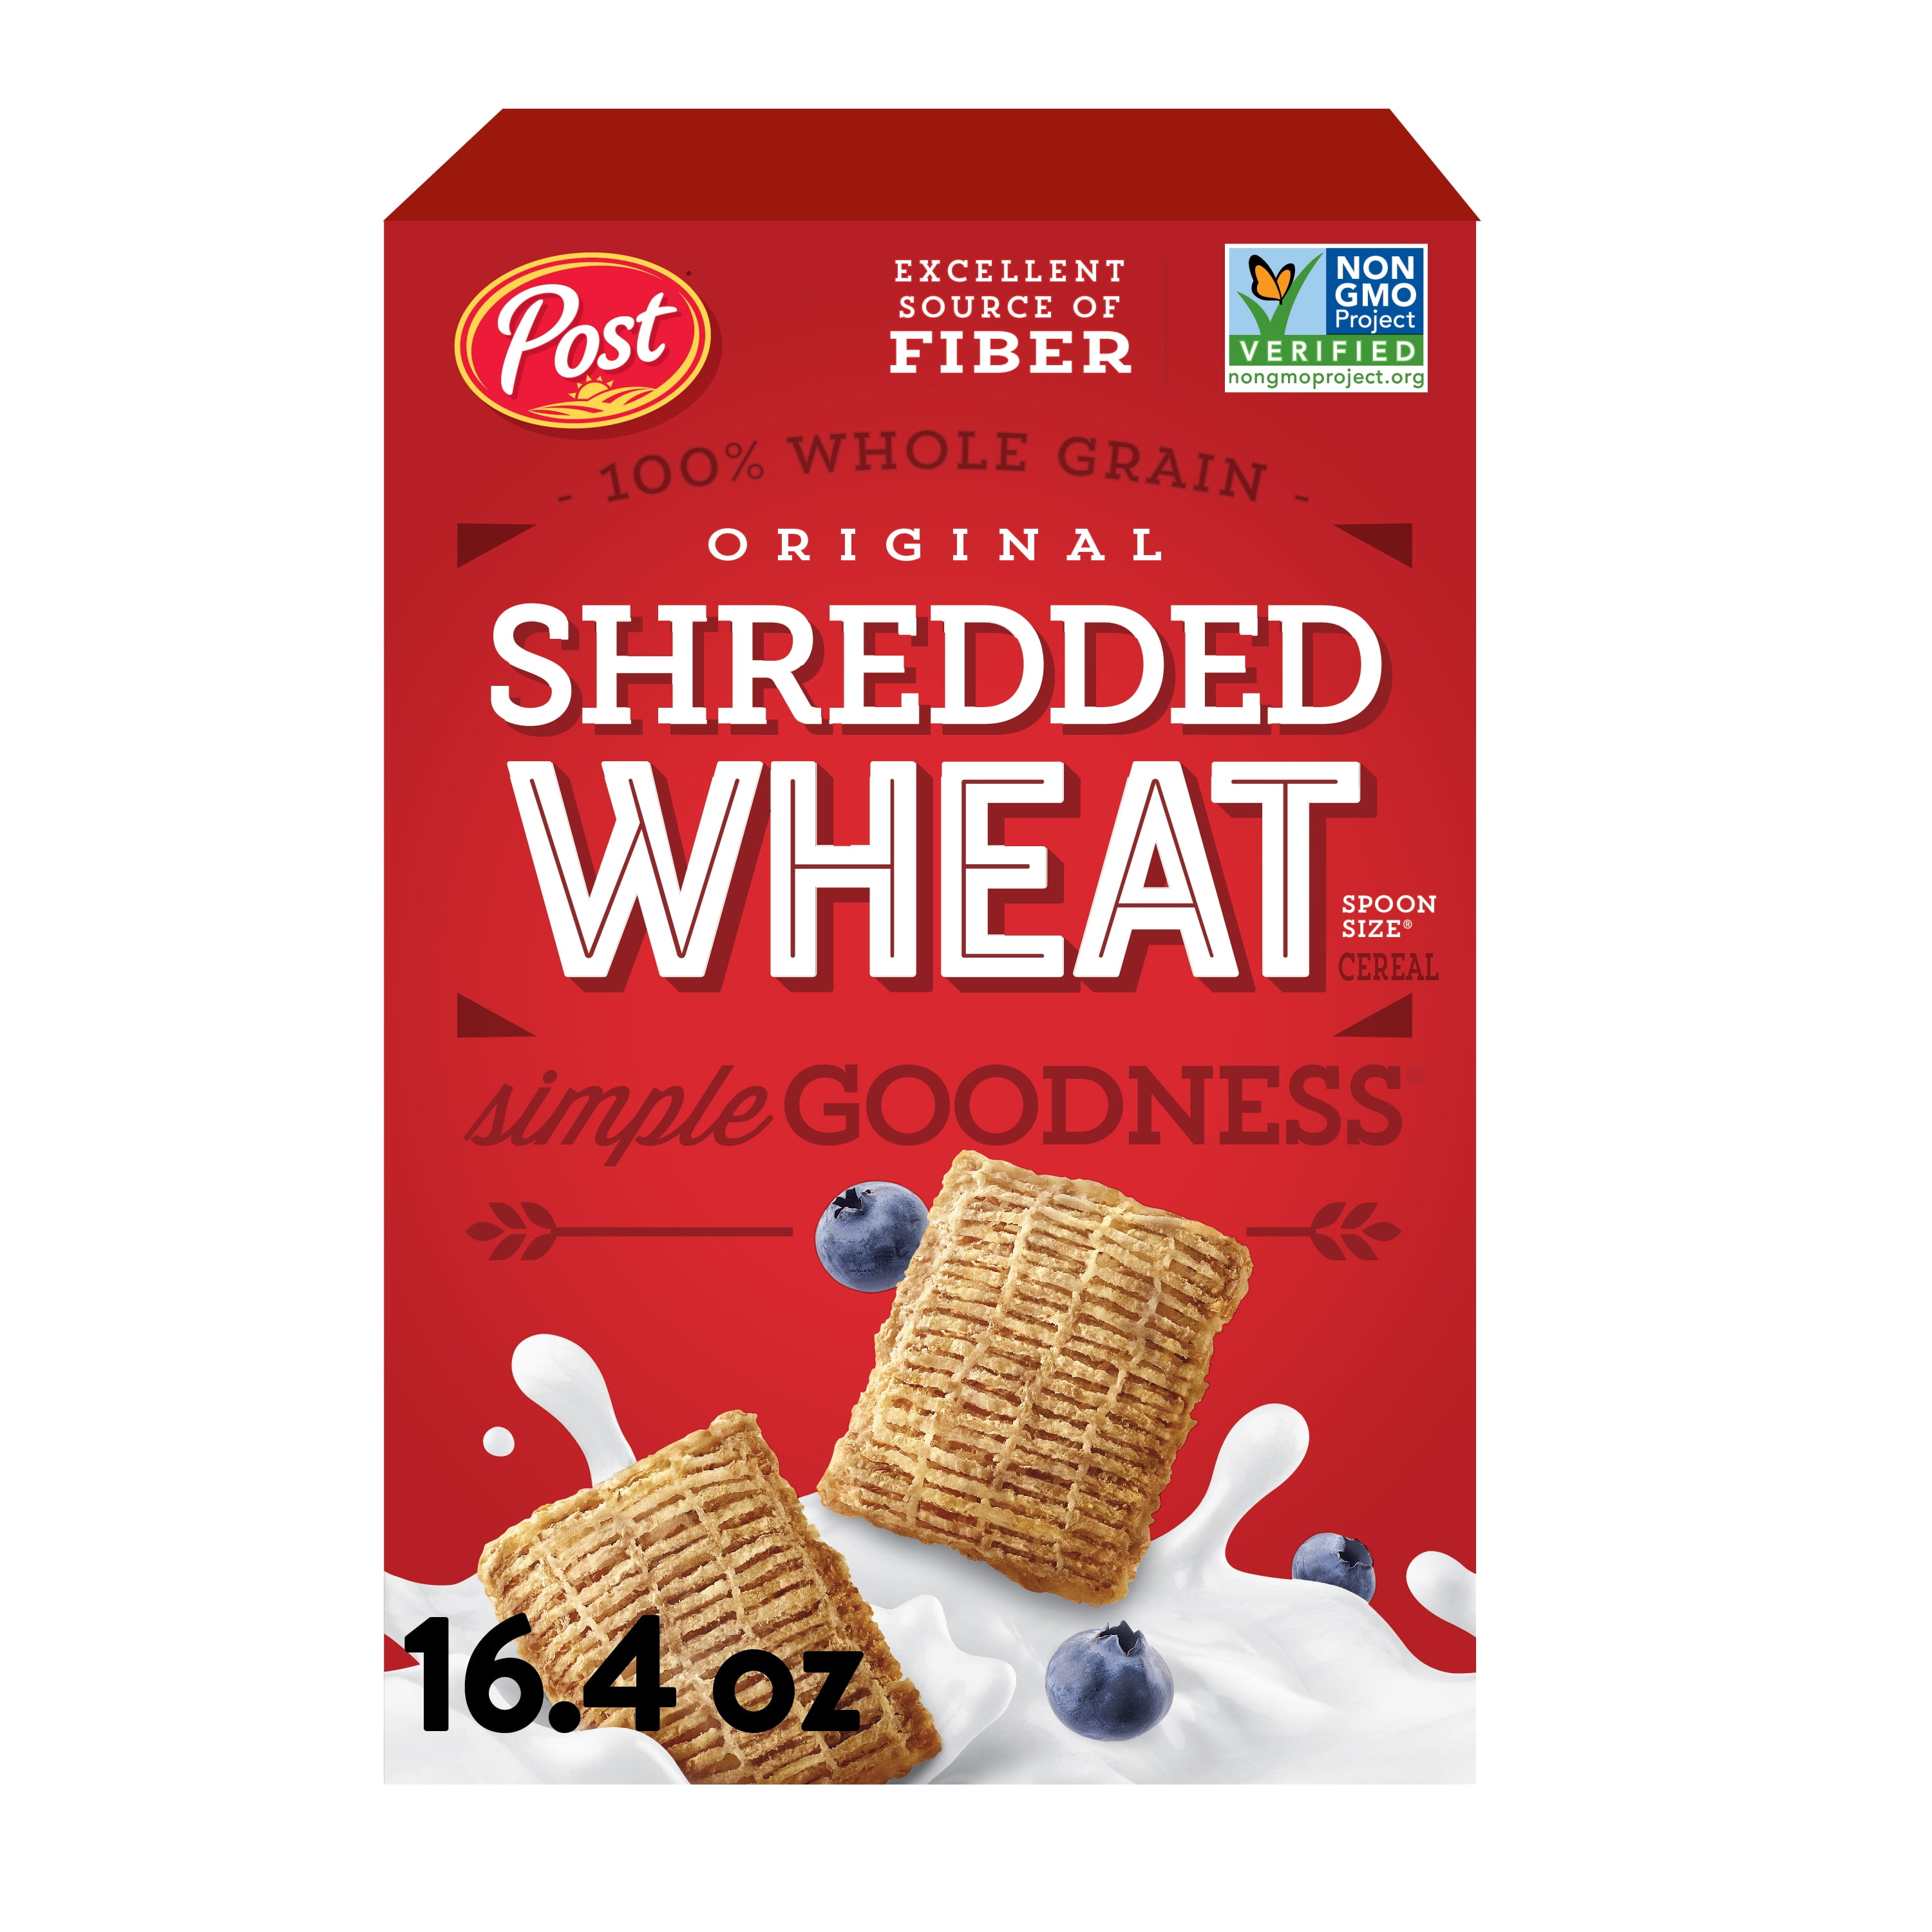 Post Spoon Size Shredded Wheat, Whole Grain Breakfast Cereal, Excellent Source of Fiber, Kosher 16.4 Ounce  1 count